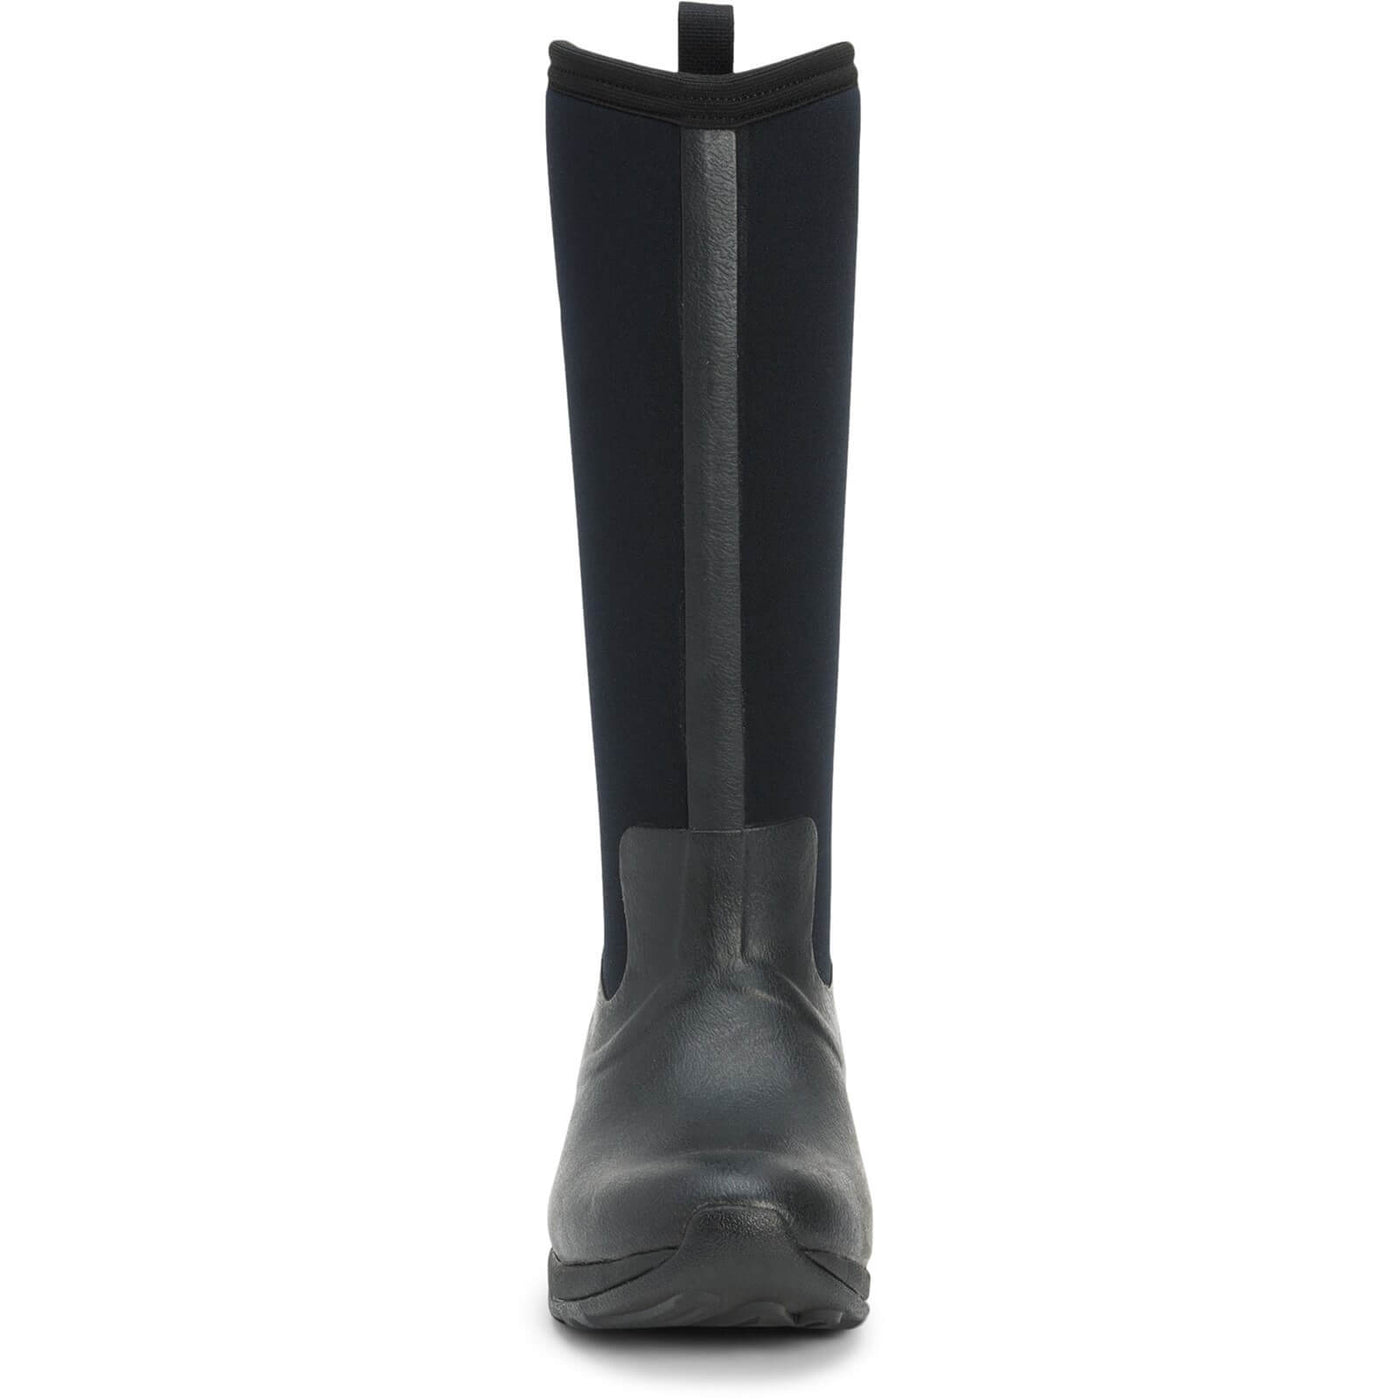 Muck Boots Arctic Adventure Pull On Wellies Black 3#colour_black